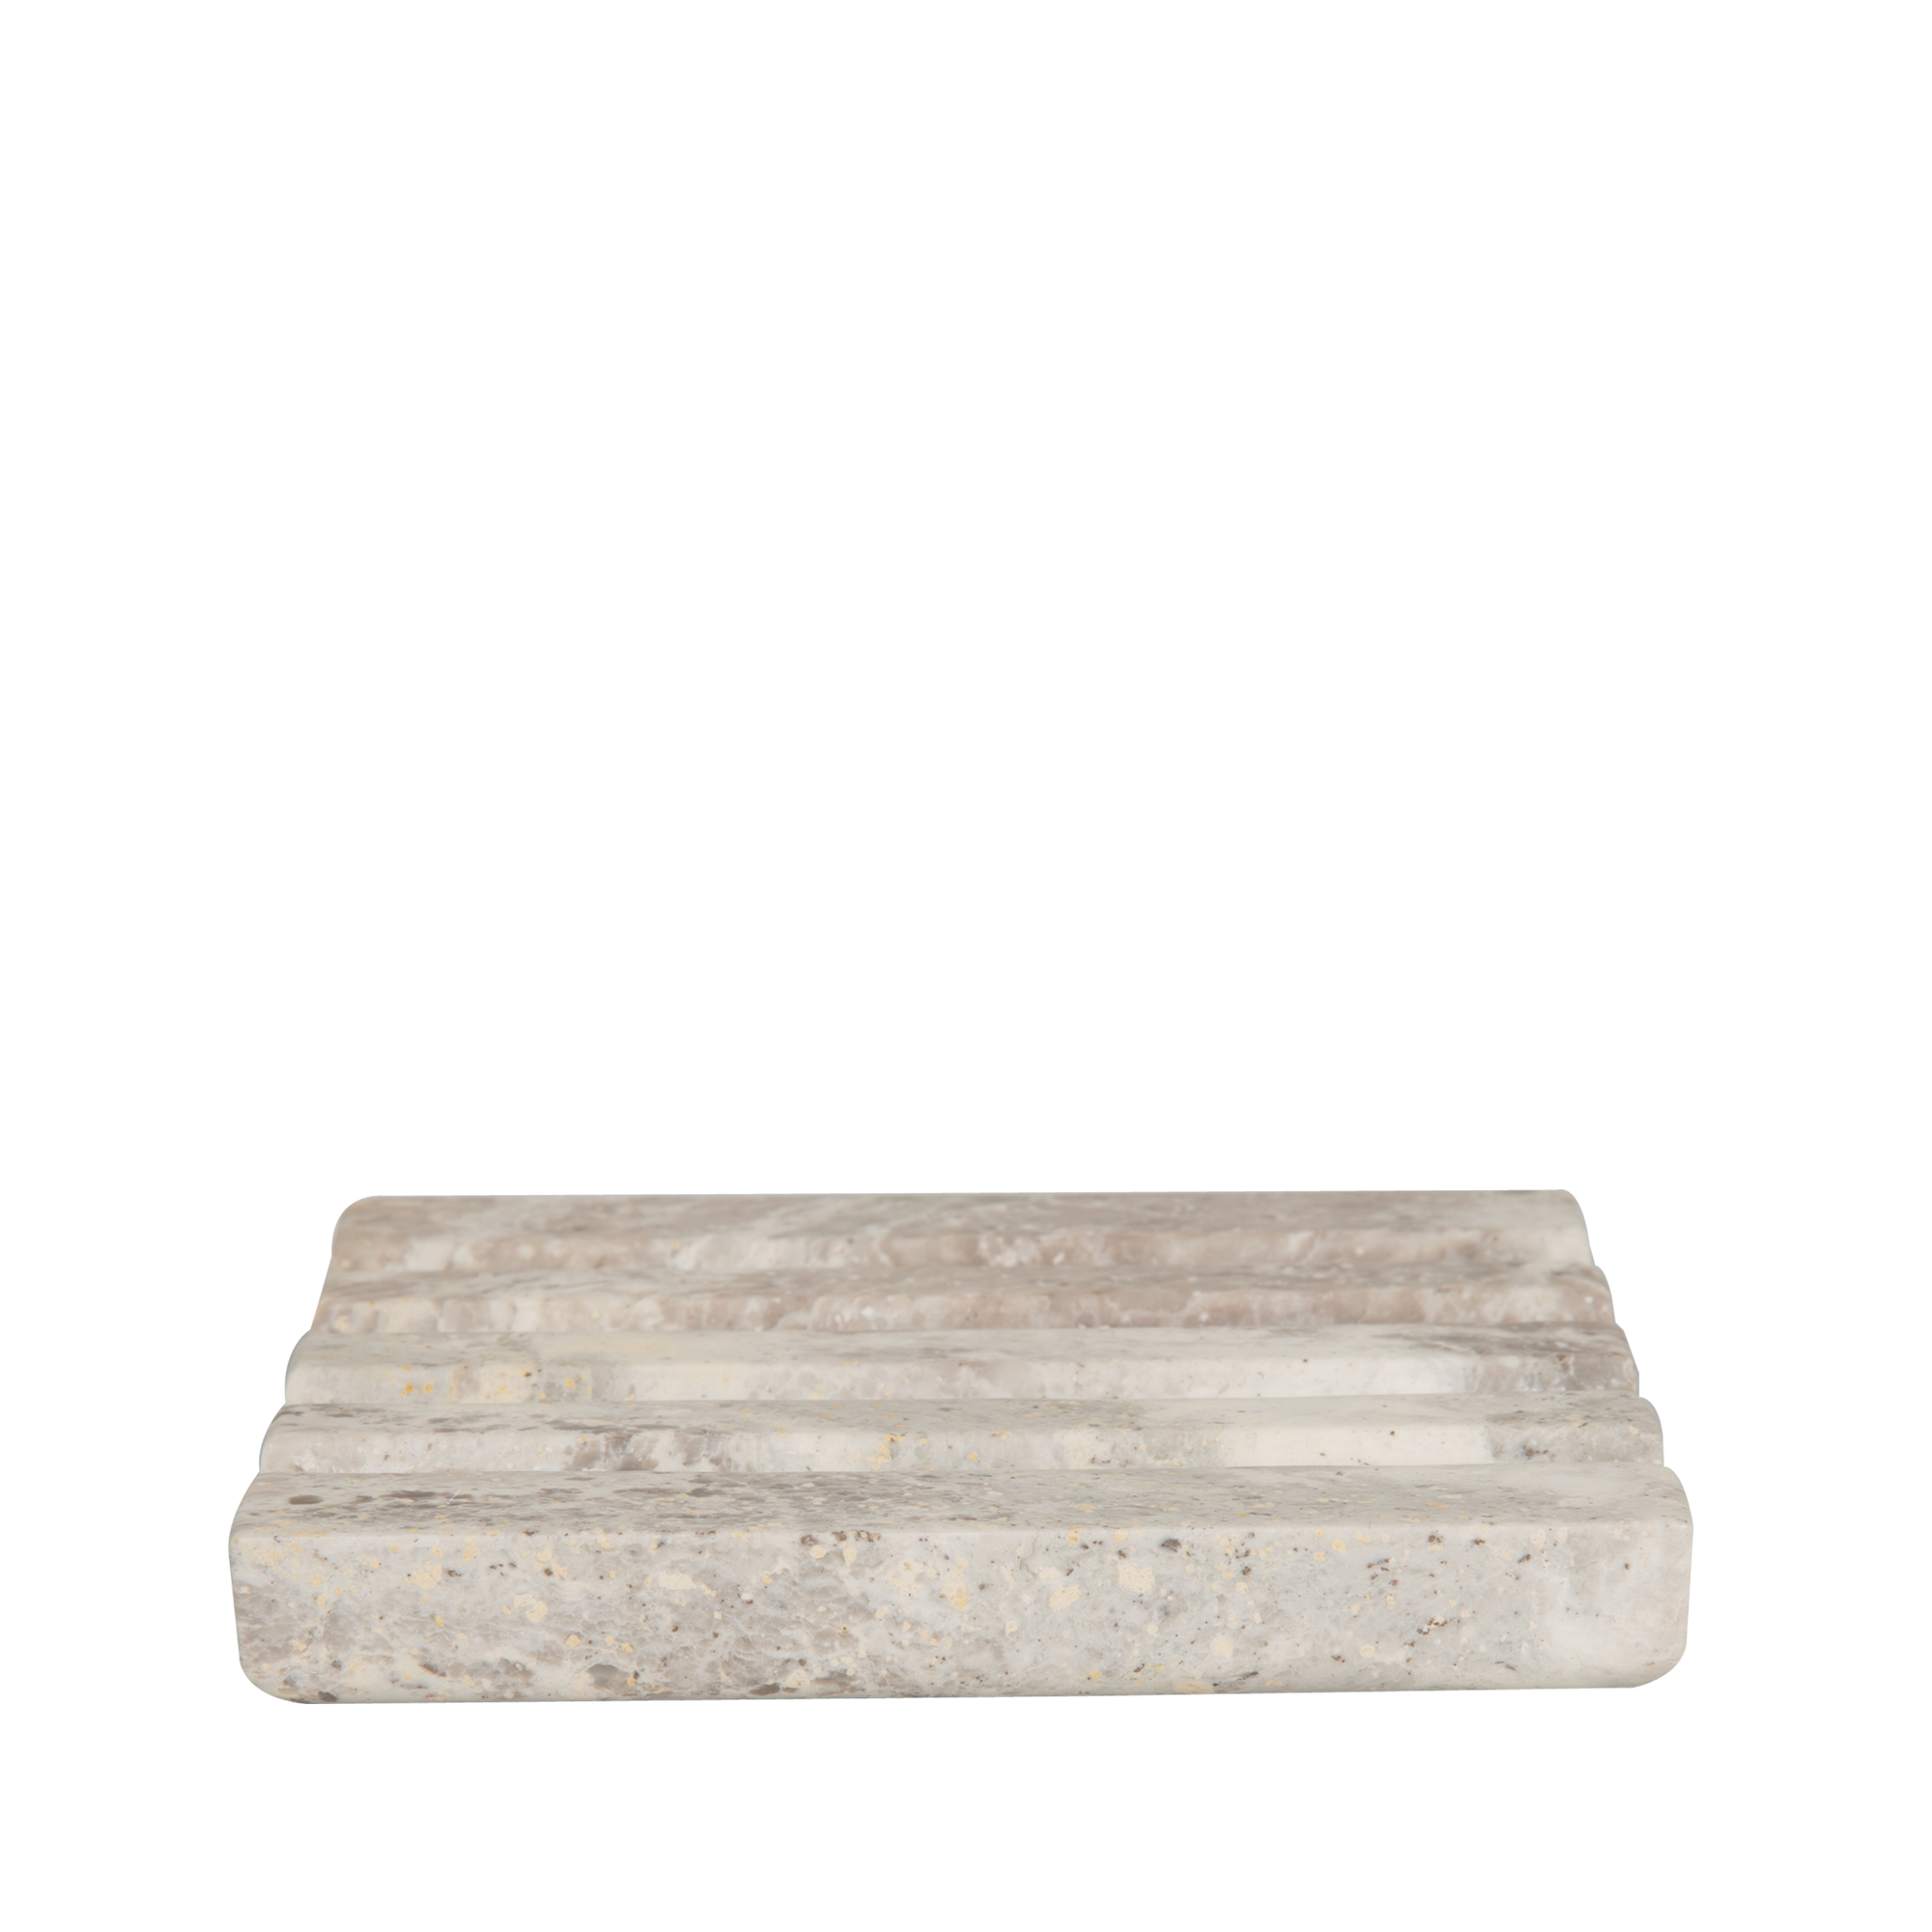 A rectangular soap dish in natural stone.